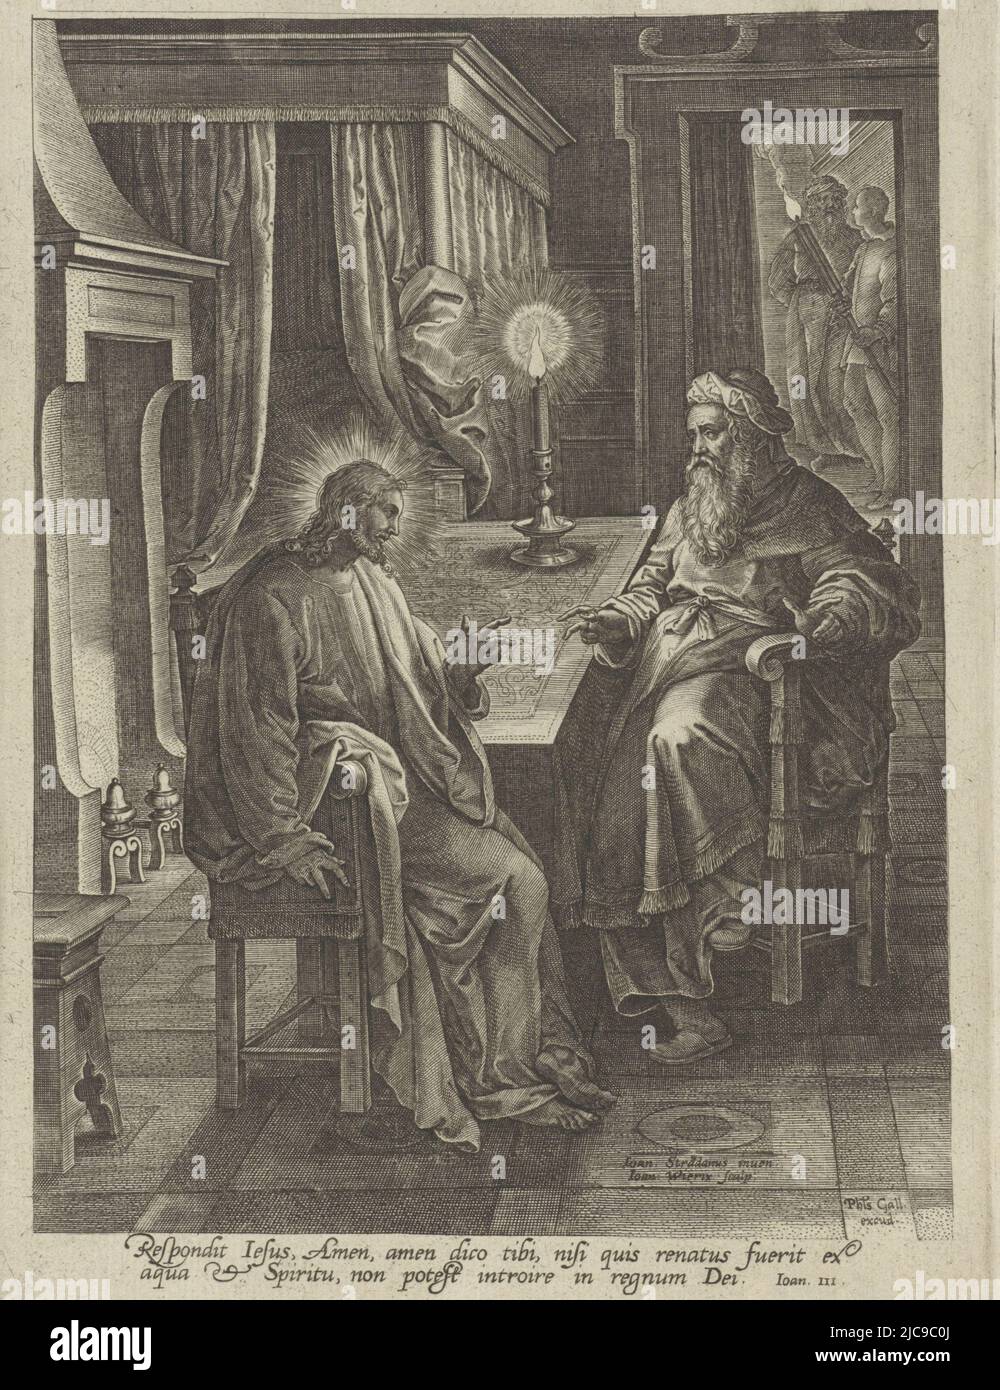 The Pharisee Nicodemus is in conversation with Christ in the middle of the night. They are seated at a table near the fireplace. In the margin a Bible quotation from John 3 in Latin, Conversation with Nicodemus, print maker: Johannes Wierix, (mentioned on object), Jan van der Straet, (mentioned on object), publisher: Philips Galle, (mentioned on object), Antwerp, 1549 - before 1612, paper, engraving, h 214 mm × w 152 mm Stock Photo